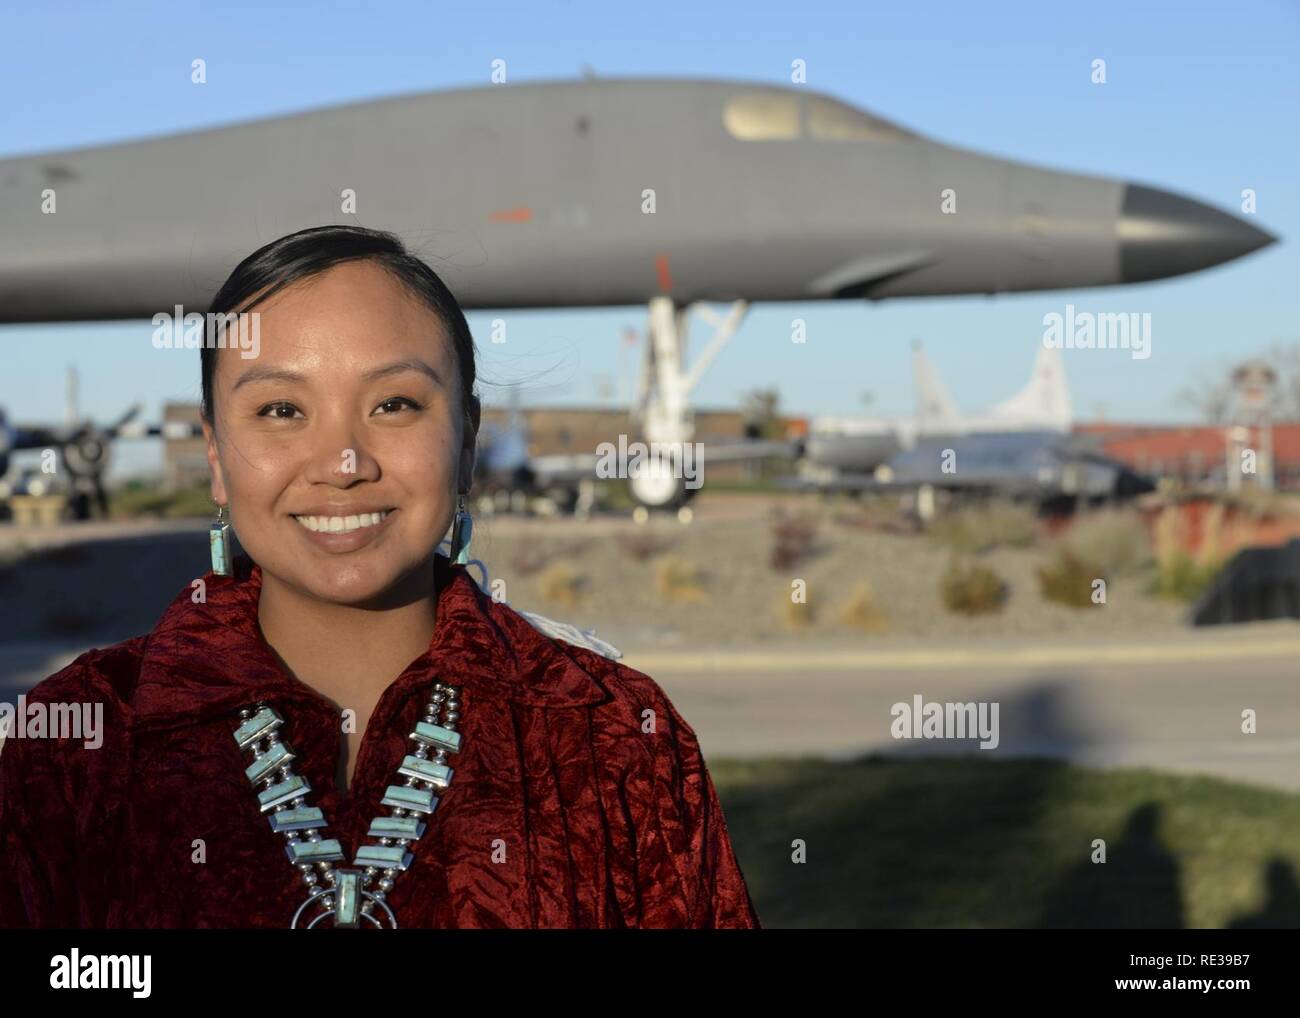 Staff Sgt. Anika Dexter, an individual protective equipment supervisor assigned to the 28th Logistics Readiness Squadron, poses for a photo in front of a B-1B Lancer at the South Dakota Air & Space Museum Nov. 10, 2016 at Ellsworth Air Force Base, S.D. Dexter, a Navajo Native American, is proud to honor her traditions and serve in the military defending her country, following in the same footsteps as her grandfathers. Stock Photo